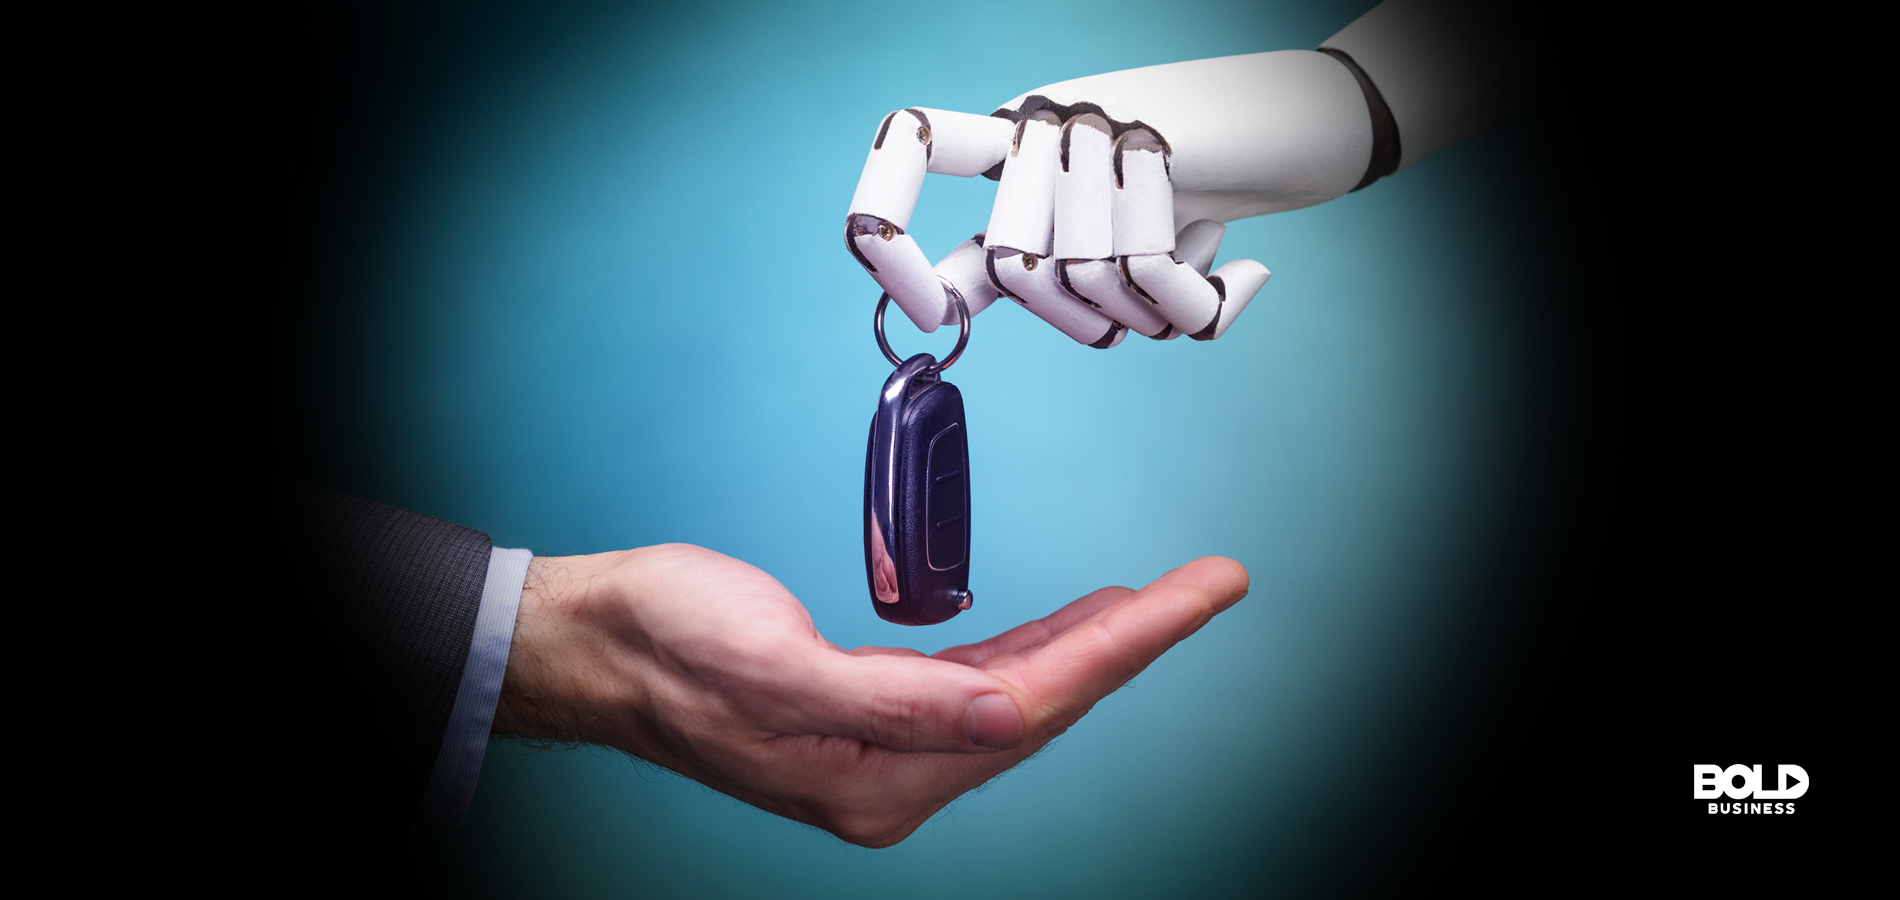 a human hand receiving a car key from a robotic hand, showing an image of progress in automated driving and transportation AI